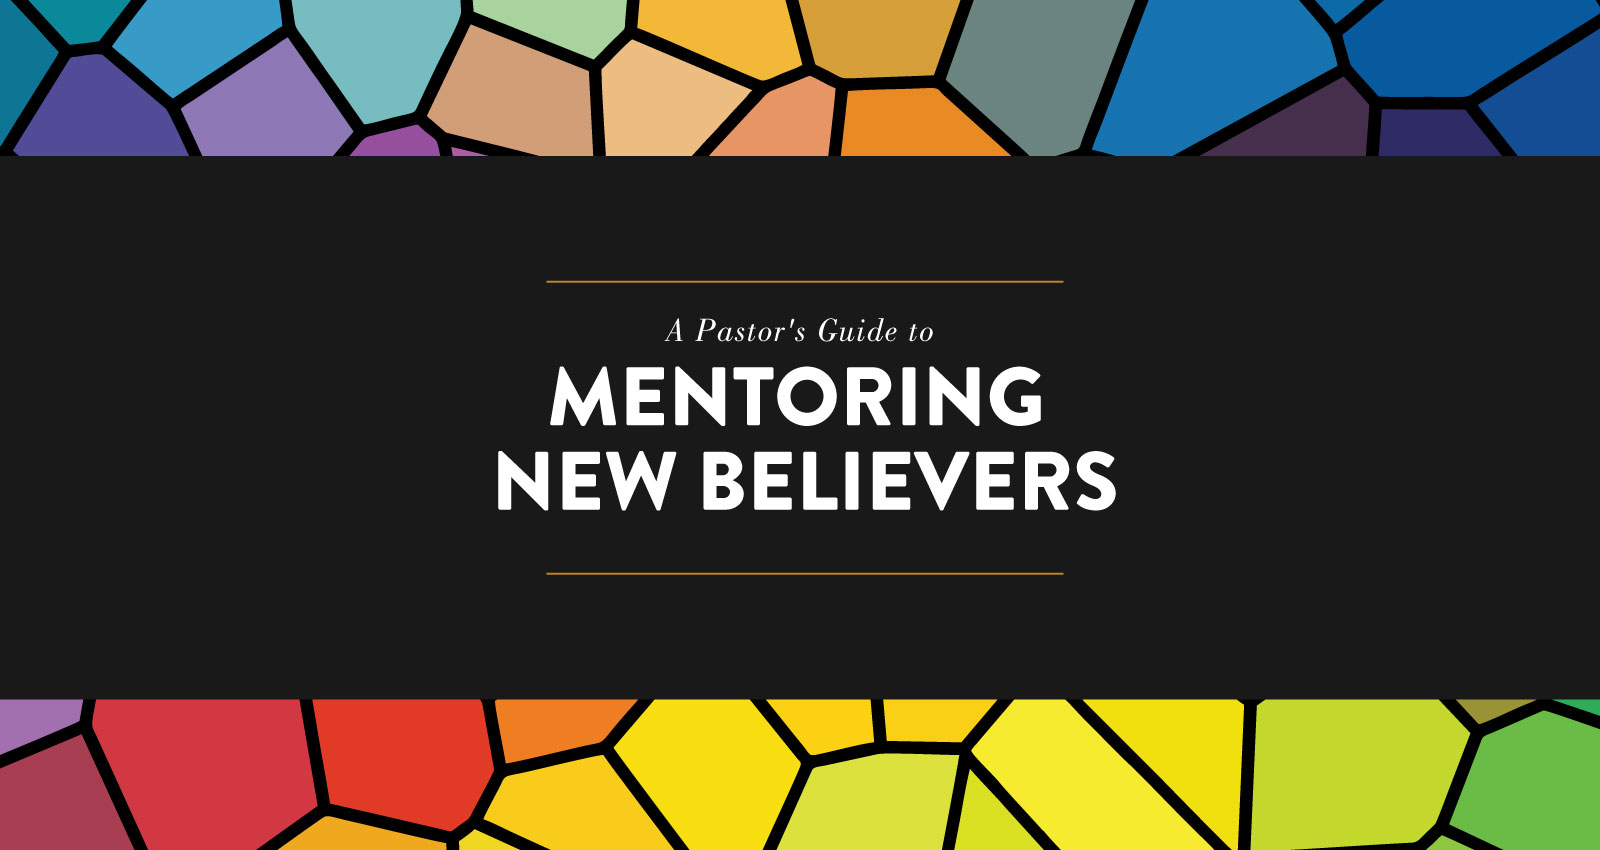 A Pastor's Guide to Mentoring New Believers